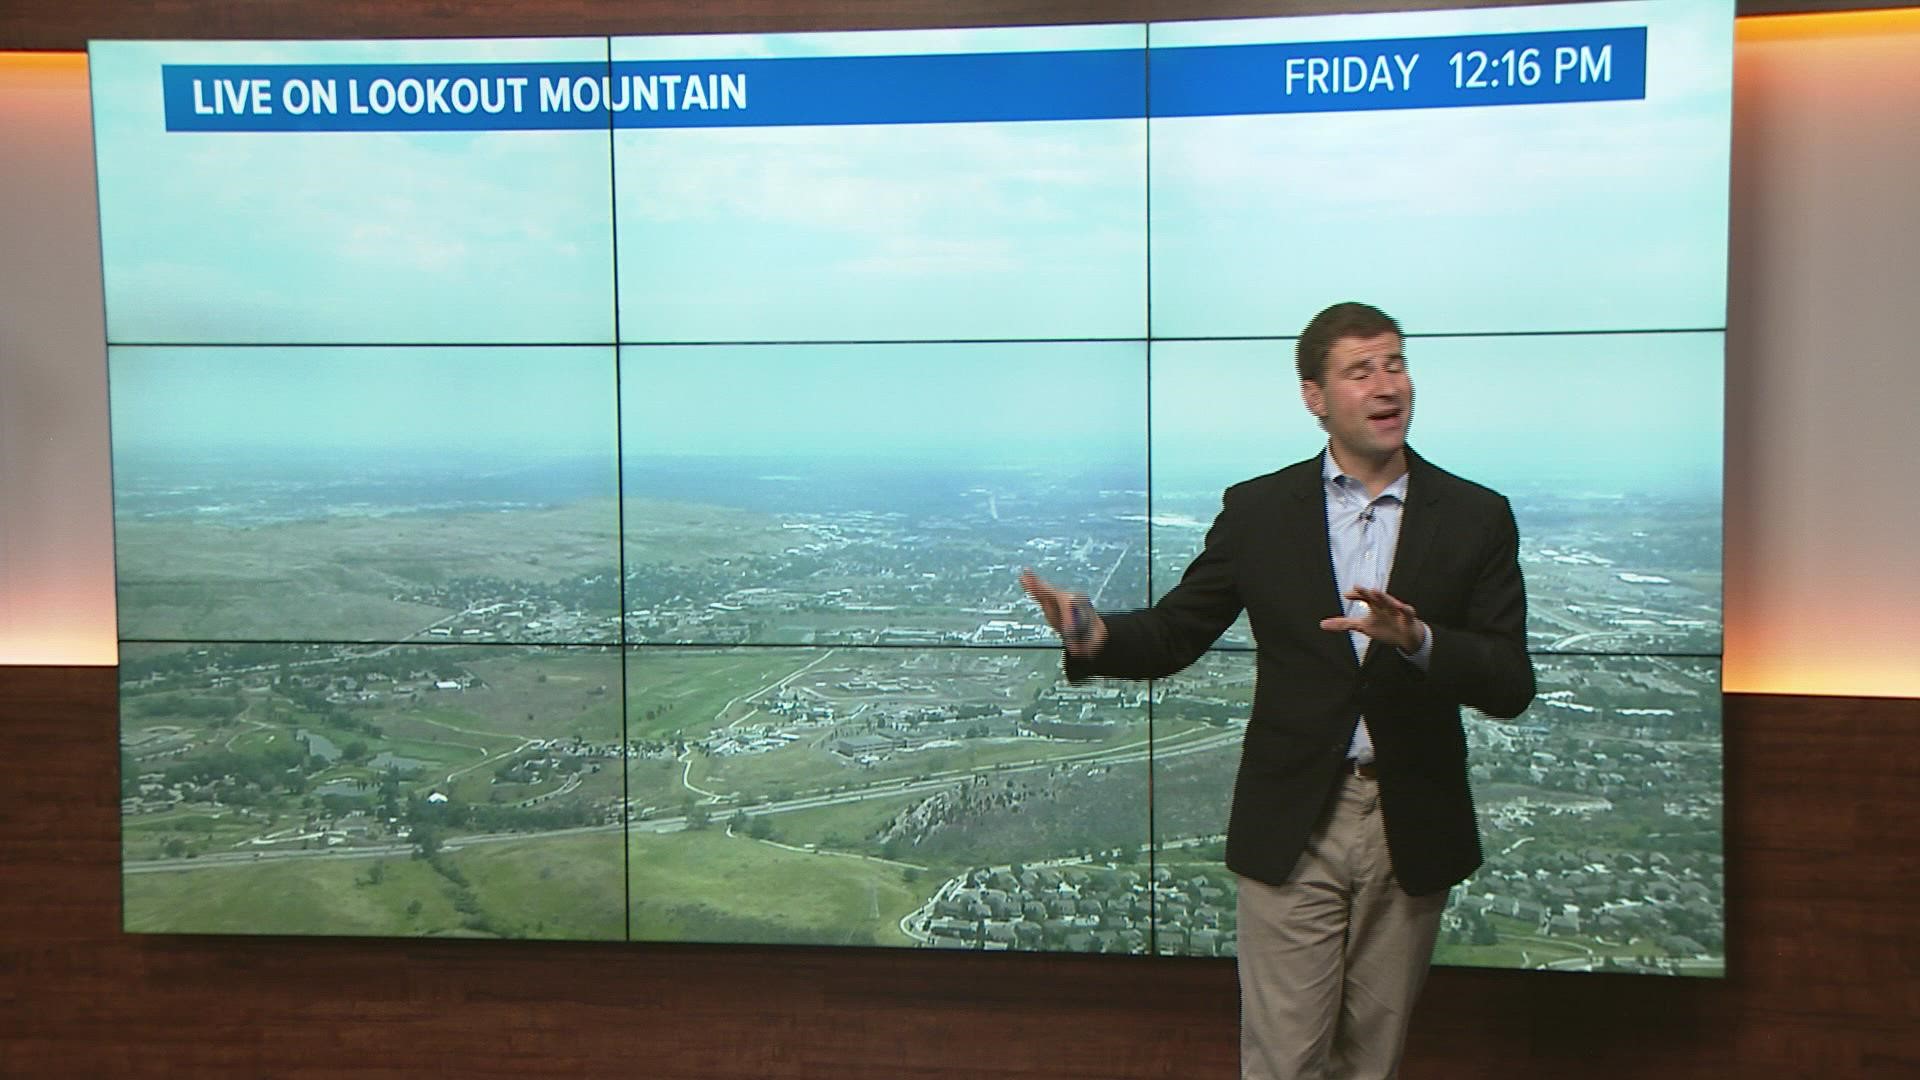 Meteorologist Chris Bianchi explains why this weekend will be extra hazy and smoky - even compared to what we've already seen this summer.